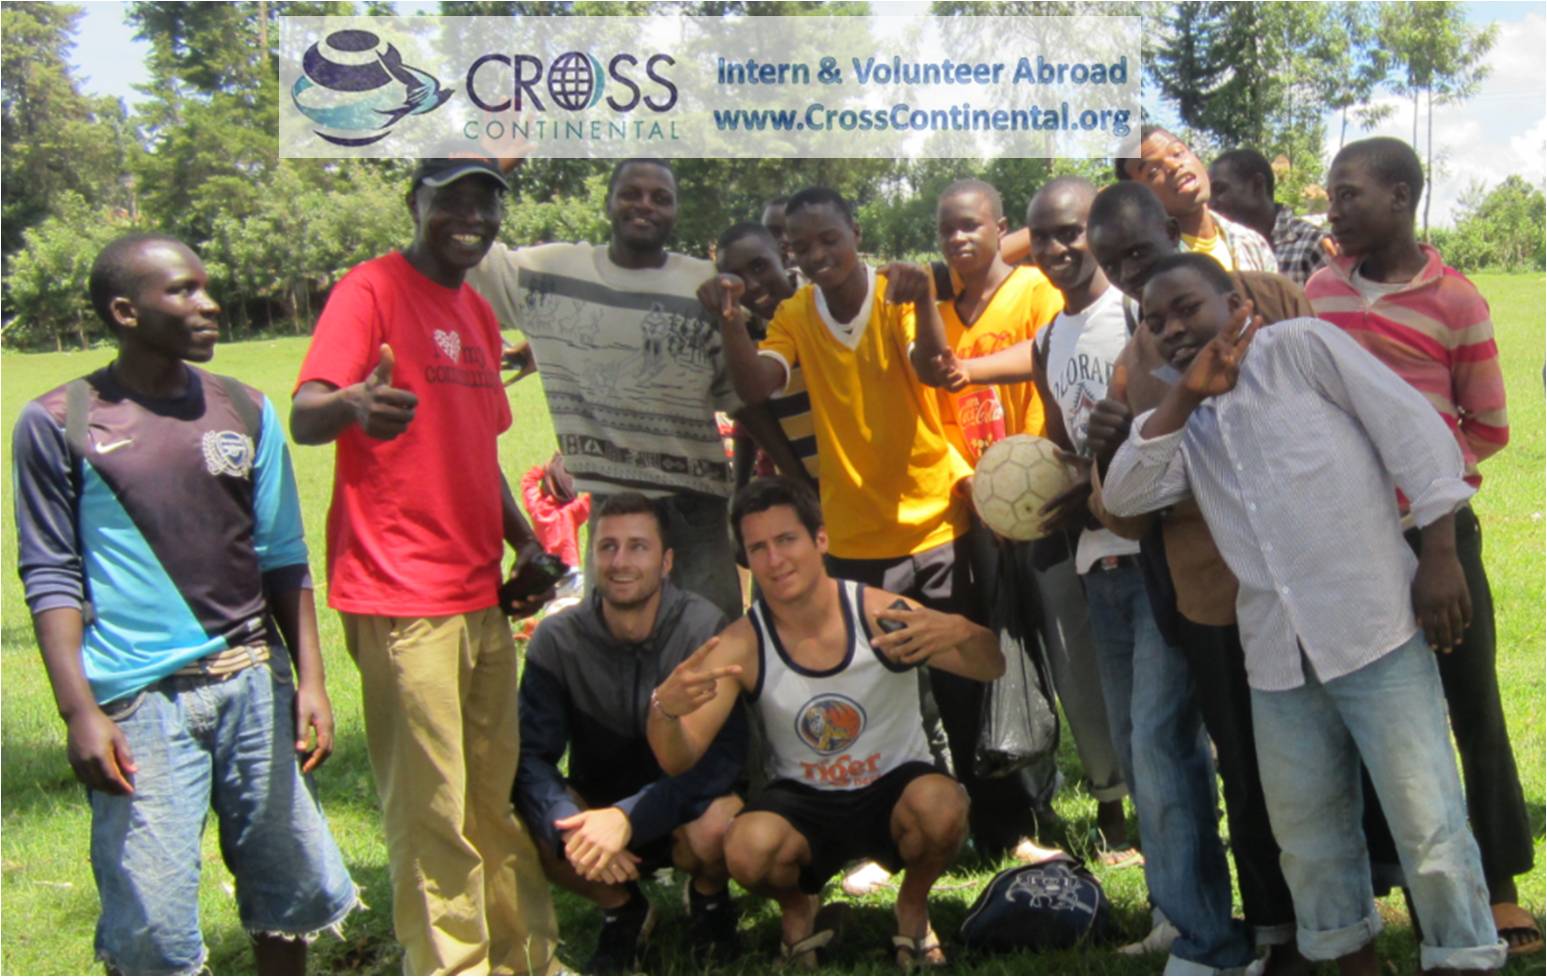 Affordable Volunteer Abroad, Intern Abroad, Cultural Education, Language Immersion, and Gap Year Programs